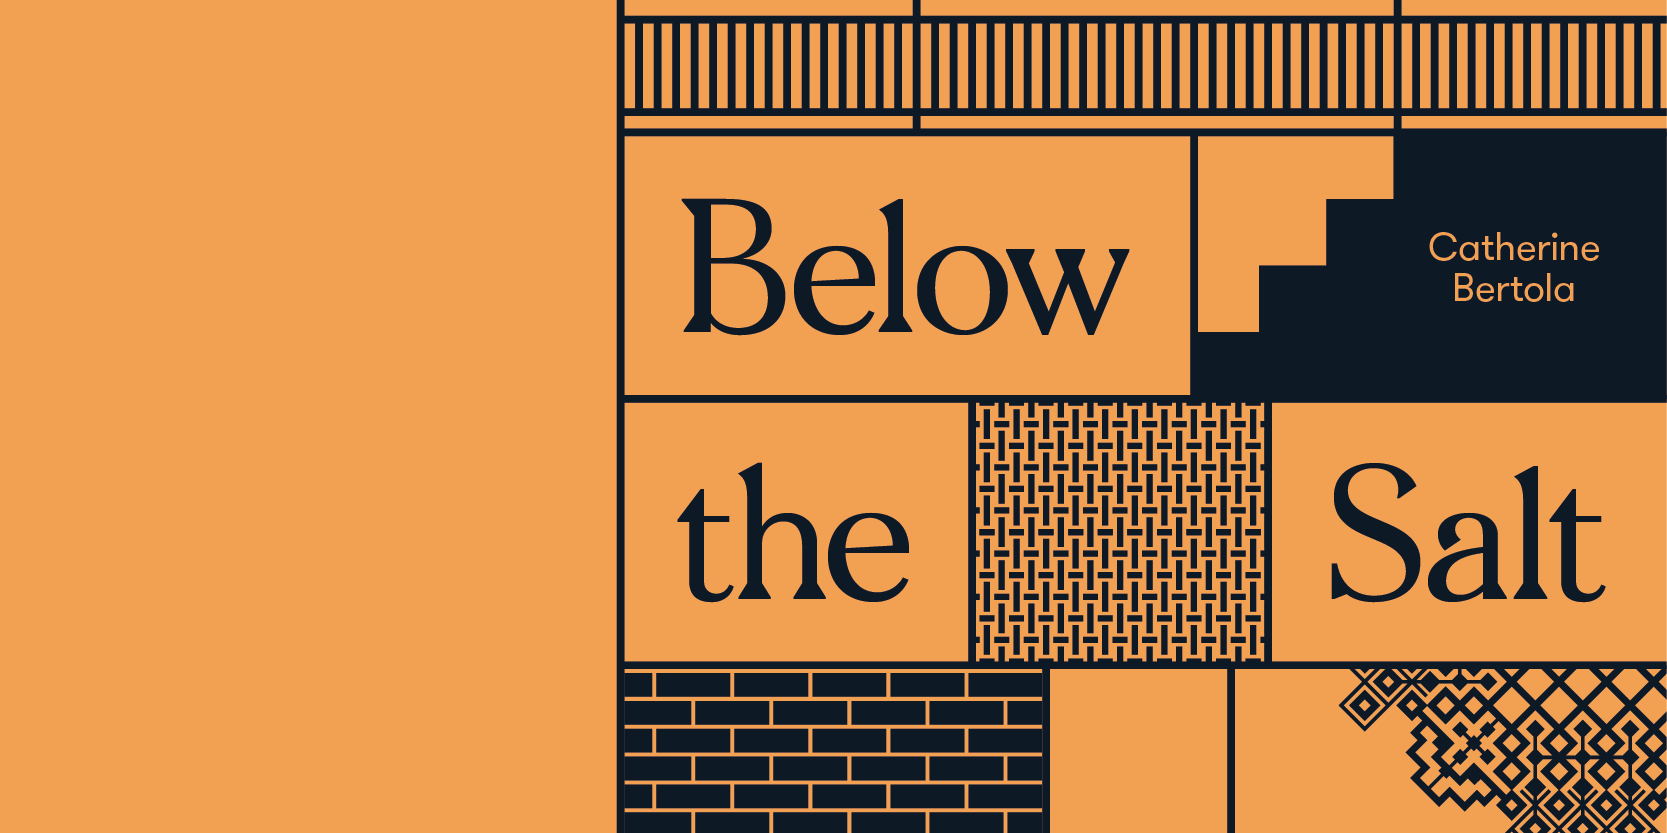 exhibition artwork for Below the Salt at Temple Newsam